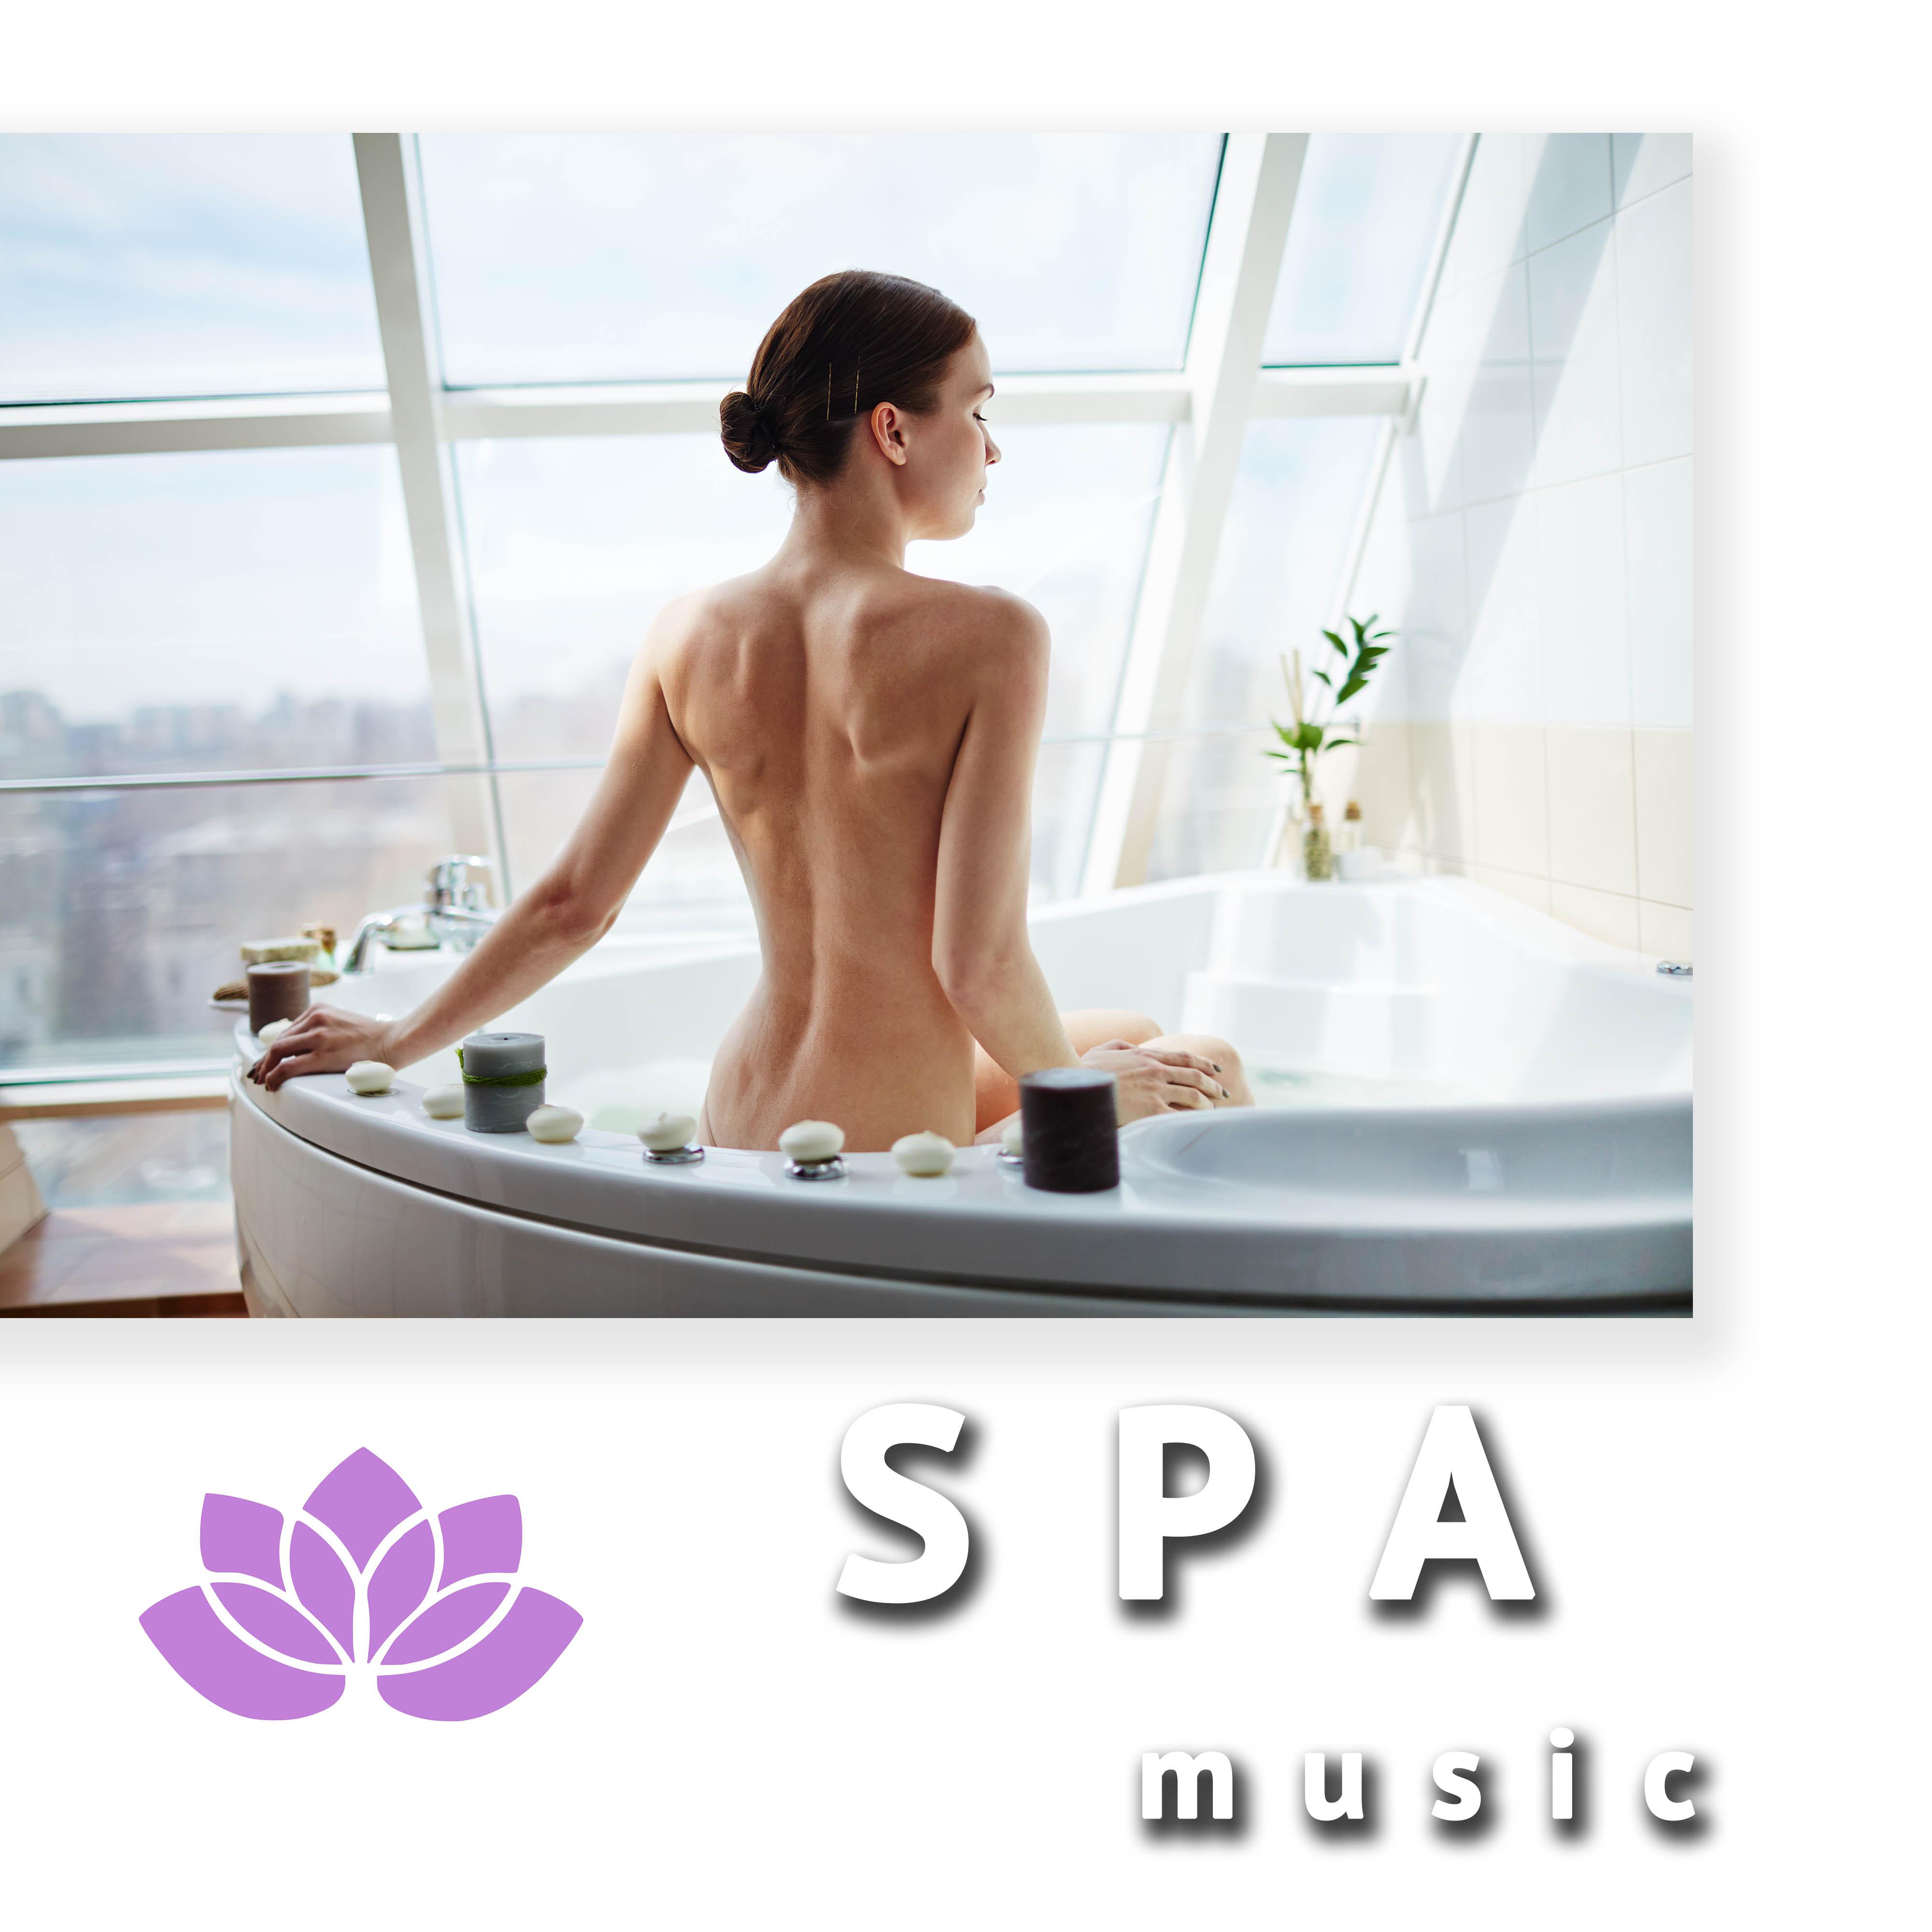 Best Spa Music- Stress Relief Sounds to find Peace